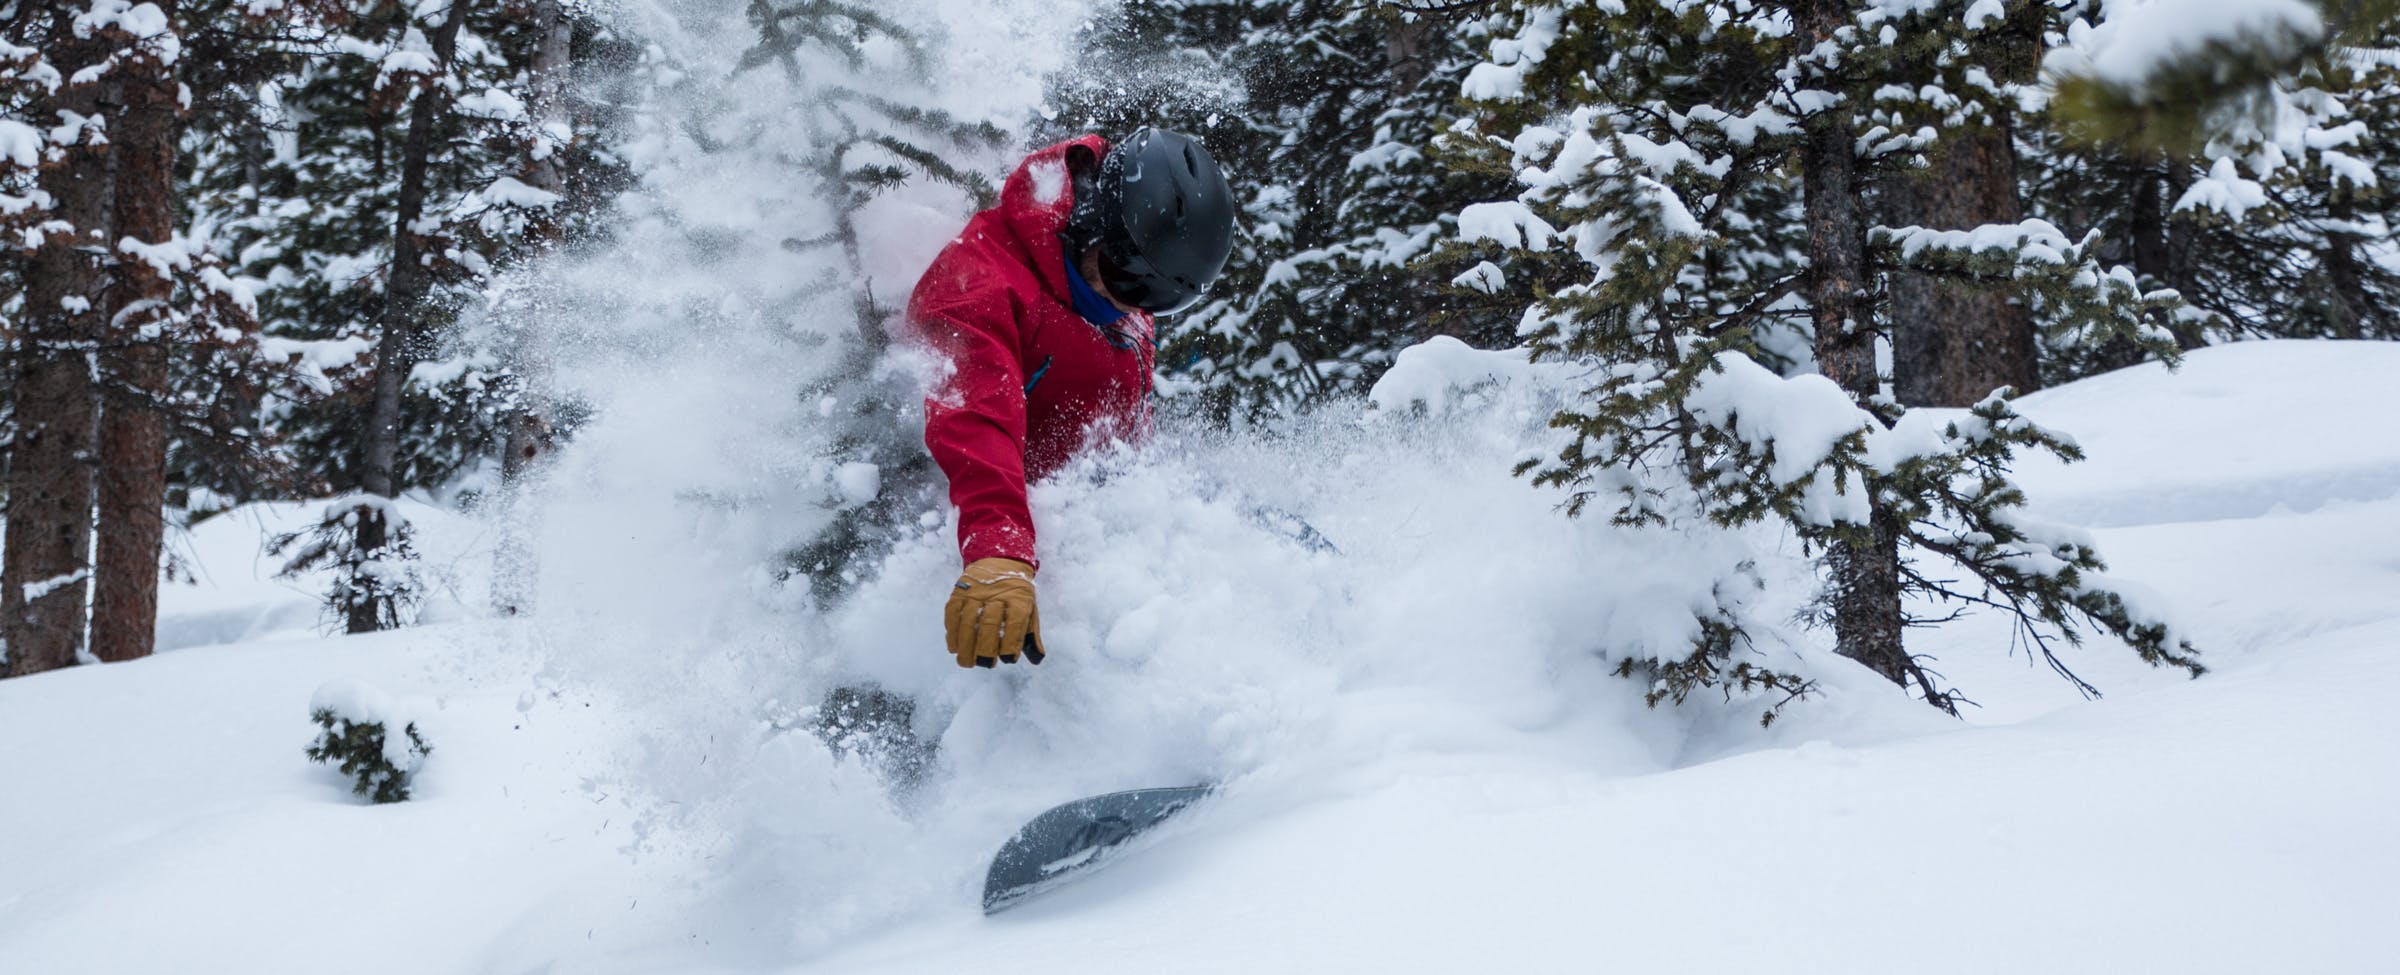 O'Neill's Jeremy Jones Outerwear Review: Designed for Backcountry Snowboarding